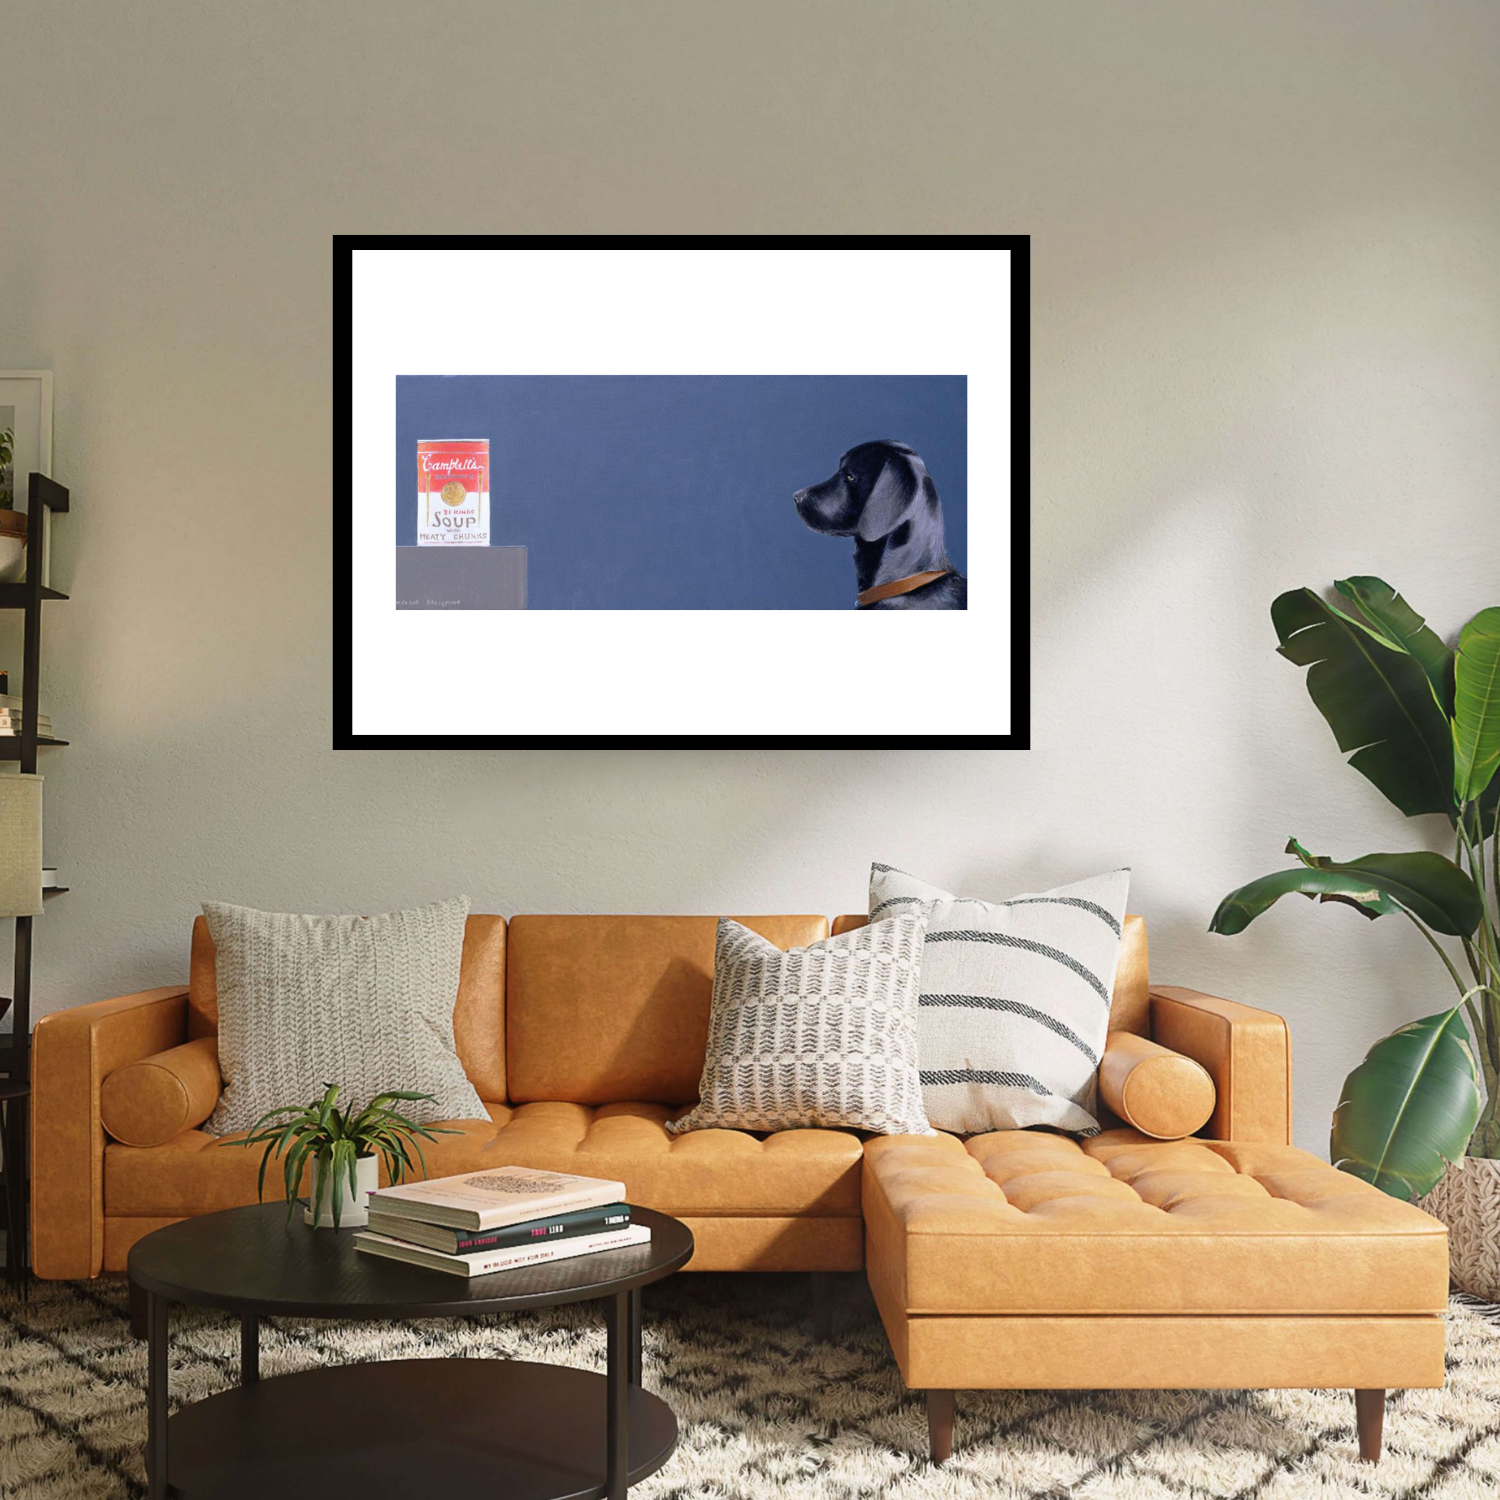 Experience the surreal "Black Dog with Campbell's Soup, 2020" by Lincoln Seligman. This print showcases a black dog facing a counter with Campbell's soup against a deep blue backdrop. Now available as a black framed archival digital print.